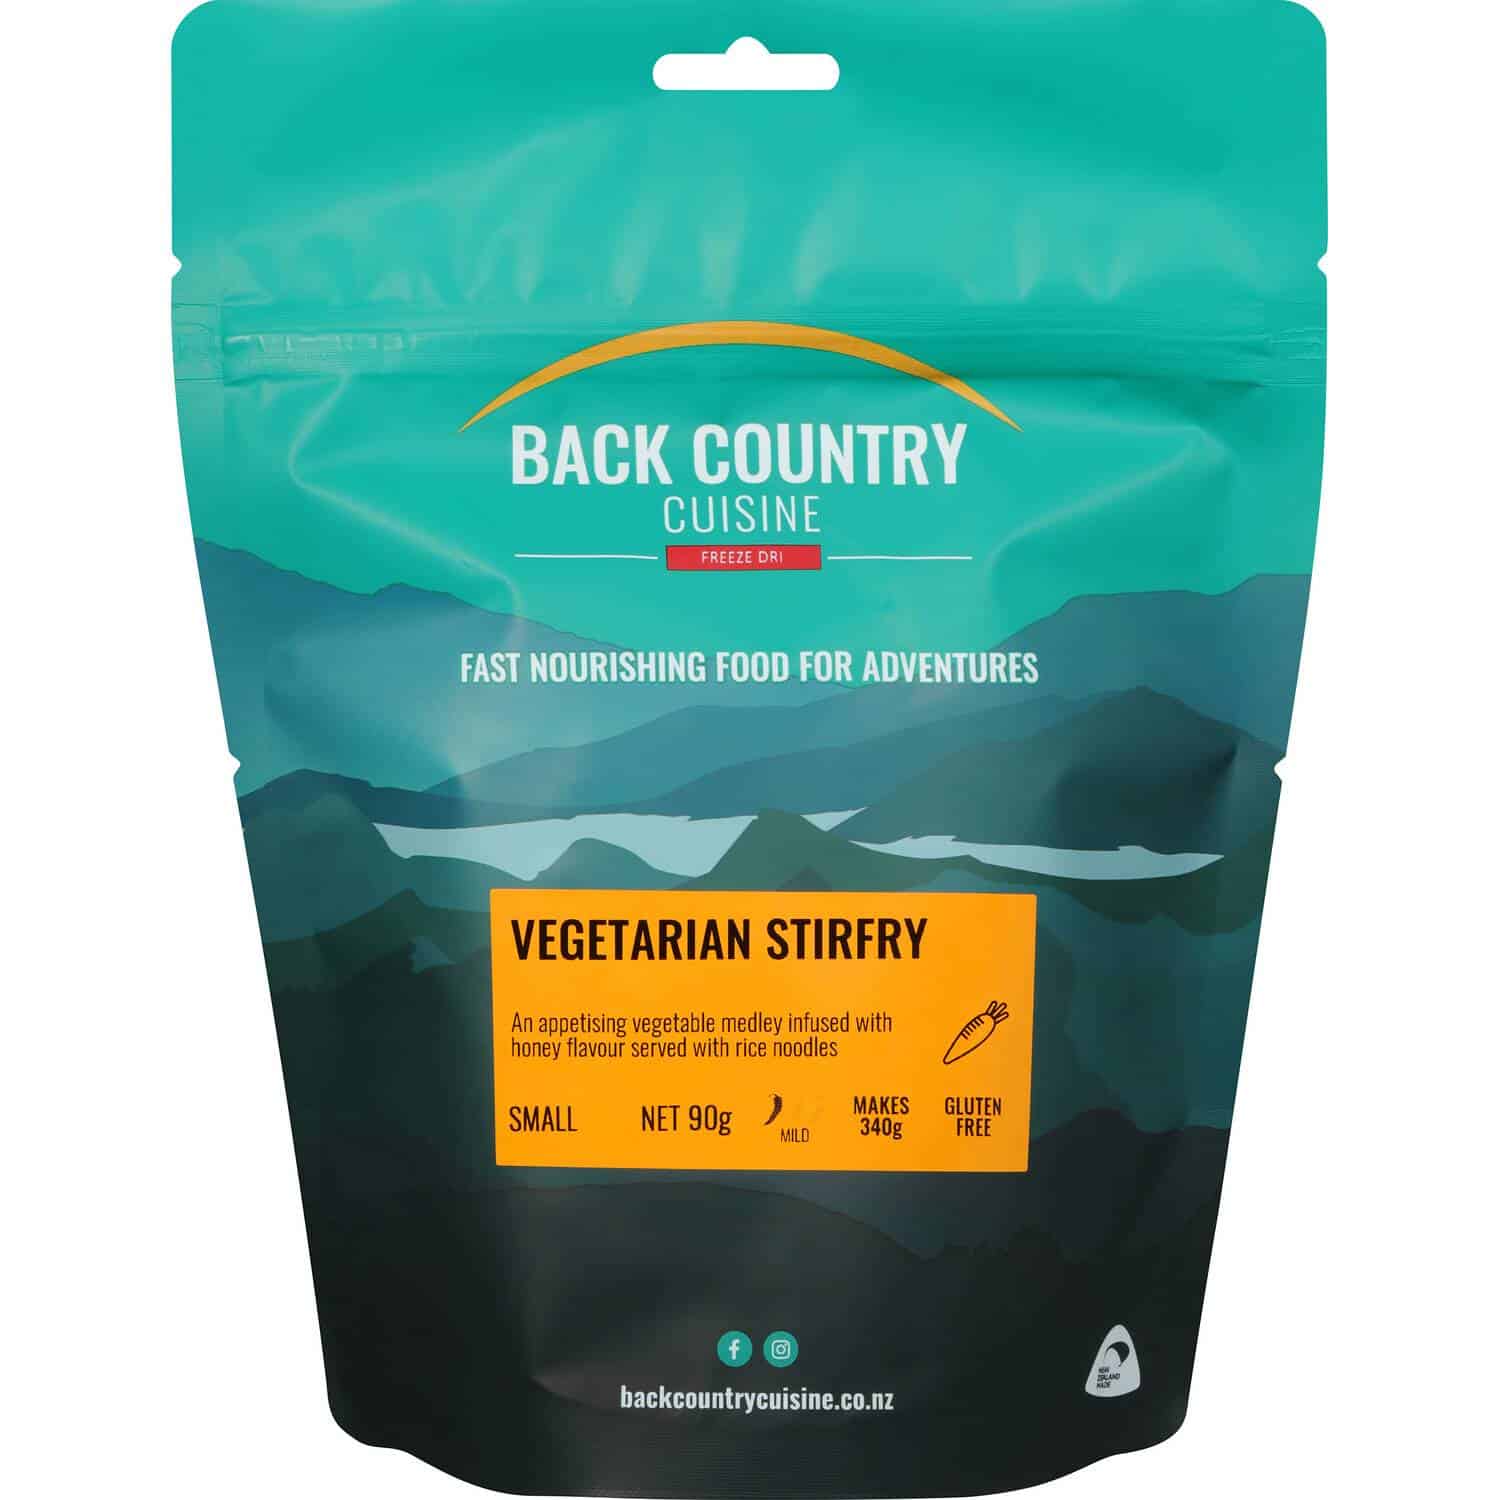 Back Country Cuisine Vegetarian Stirfry Small - Tramping Food and Accessories sold by Venture Outdoors NZ